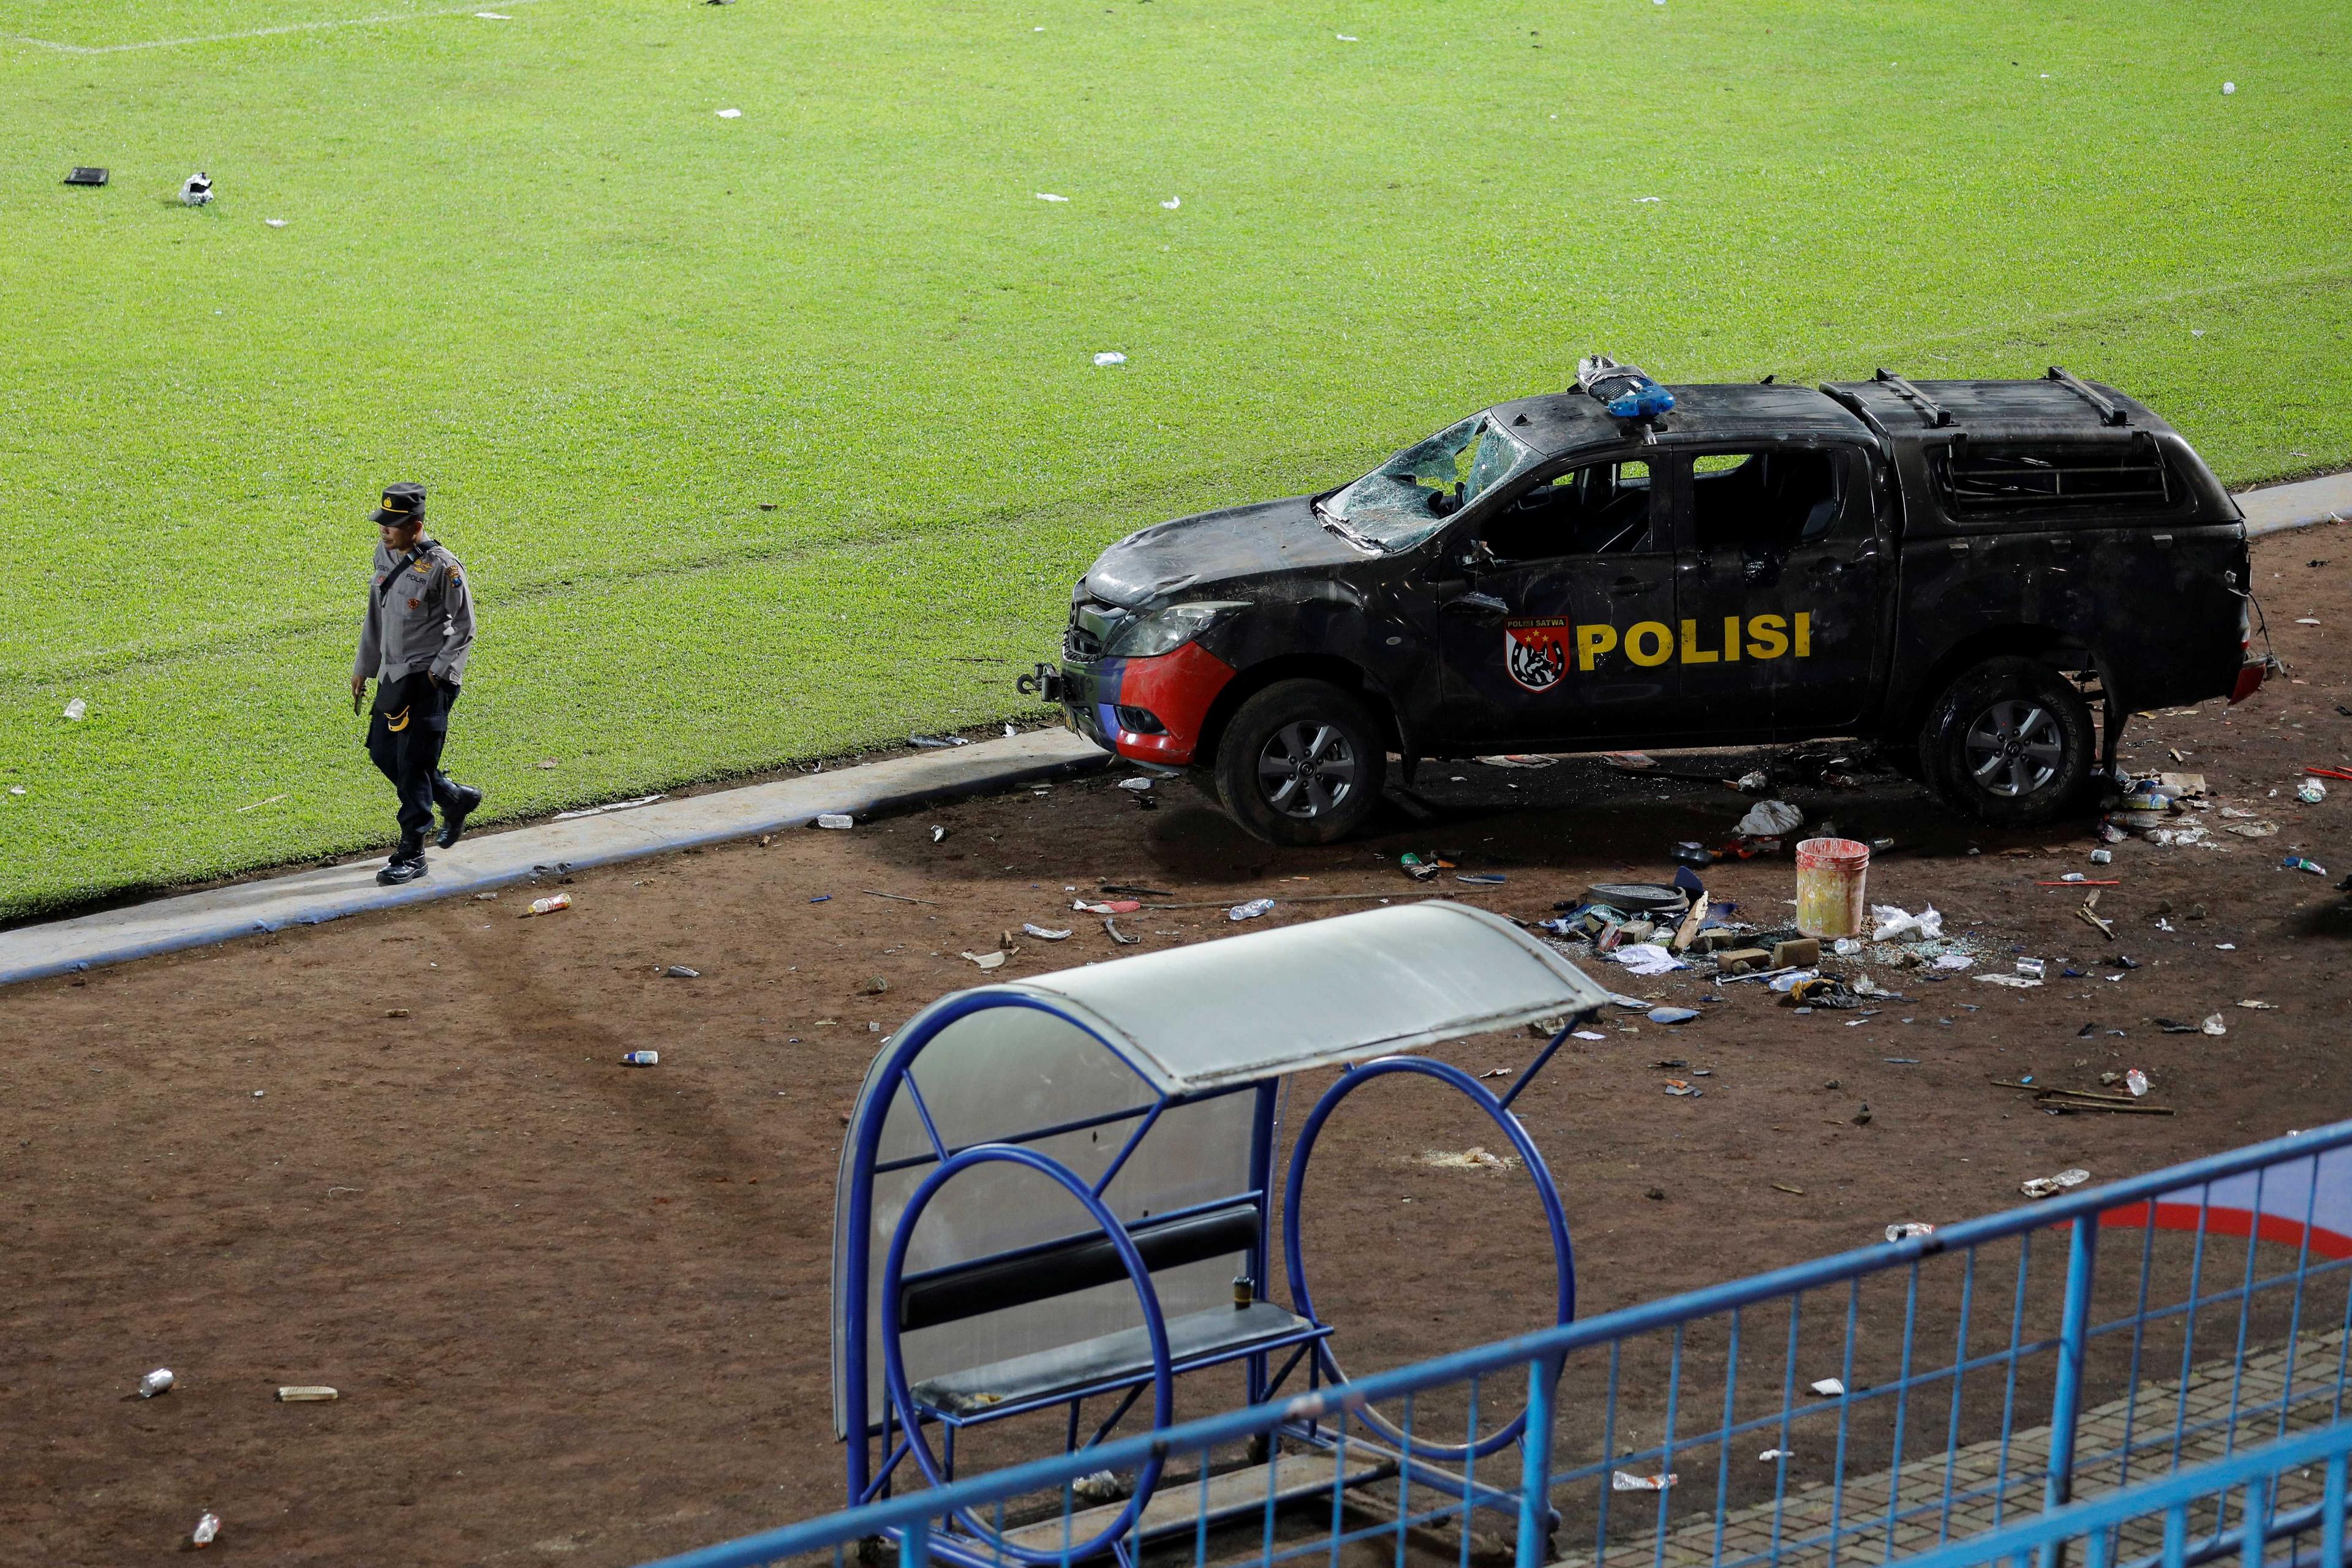 An officer walks as a damaged police vehicle is seen inside the Kanjuruhan stadium where a riot and stampede took place following a soccer match between Arema vs Persebaya, in Malang, East Java province, Indonesia, Oct 2. Photo: Reuters